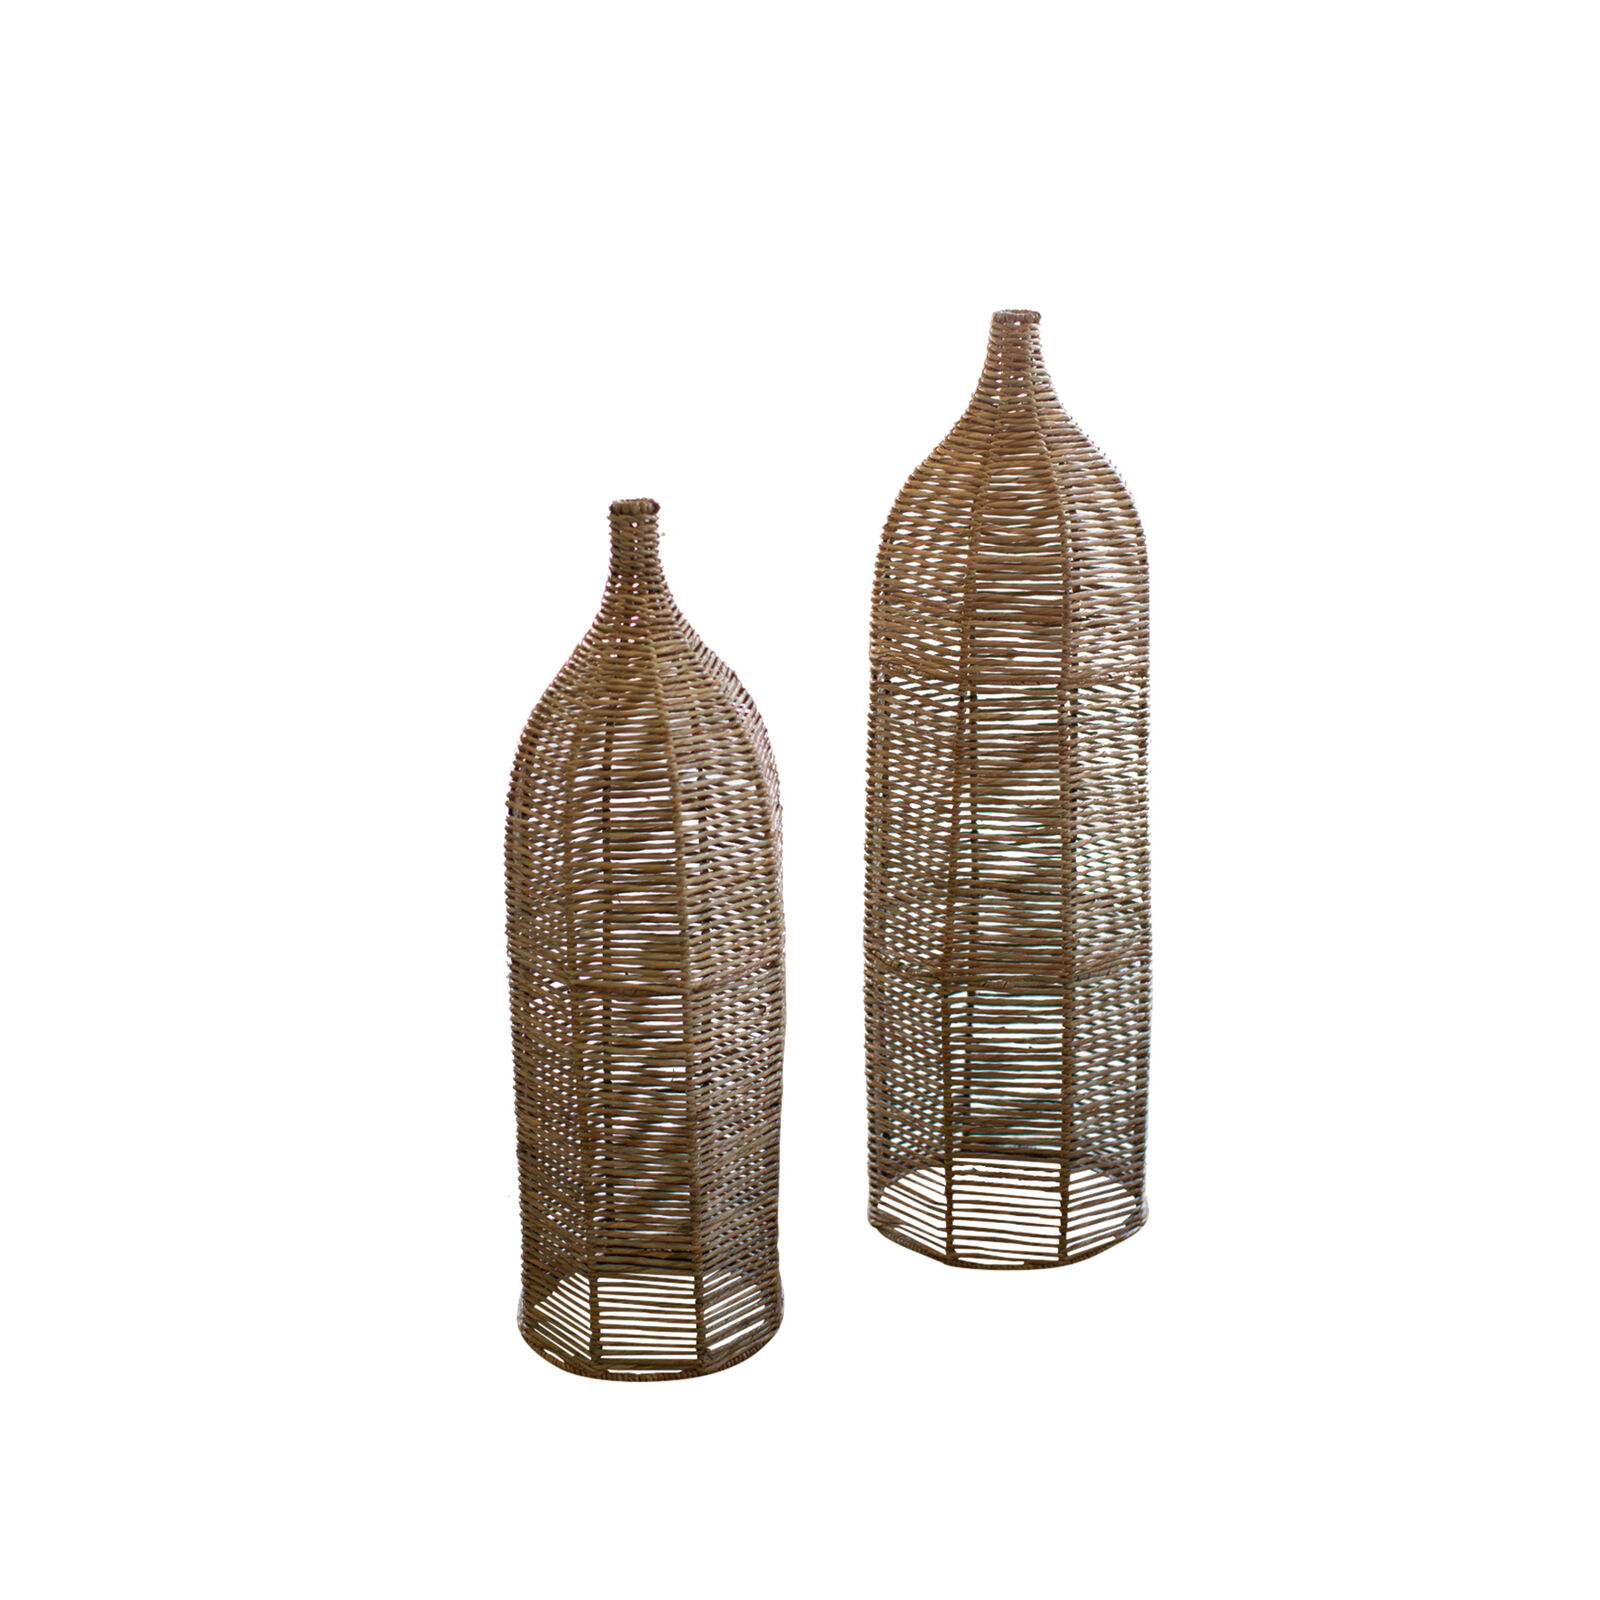 Tall Decorative Bottles Set Two Natural Woven Seagrass Metal Frame Floor Vase